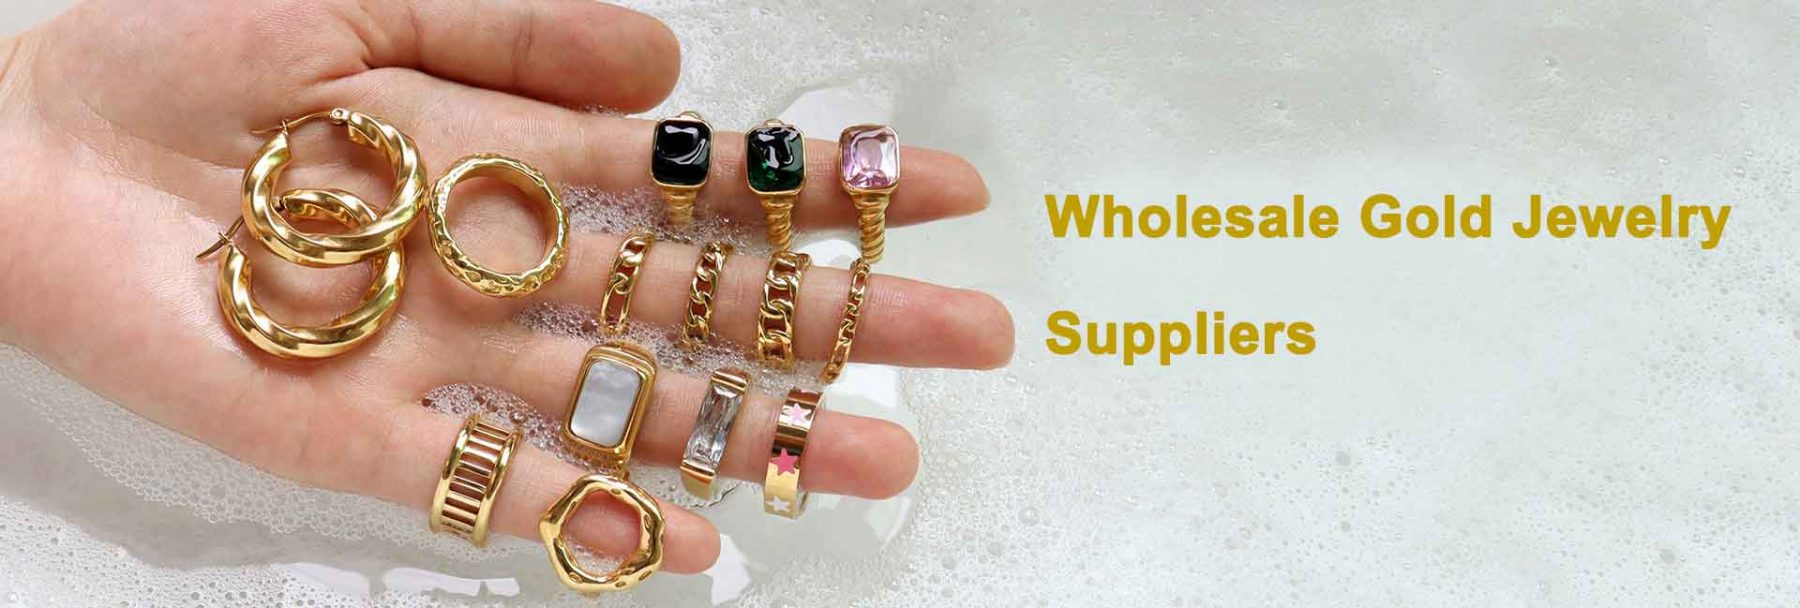 Key factors in selecting wholesale gold jewelry suppliers